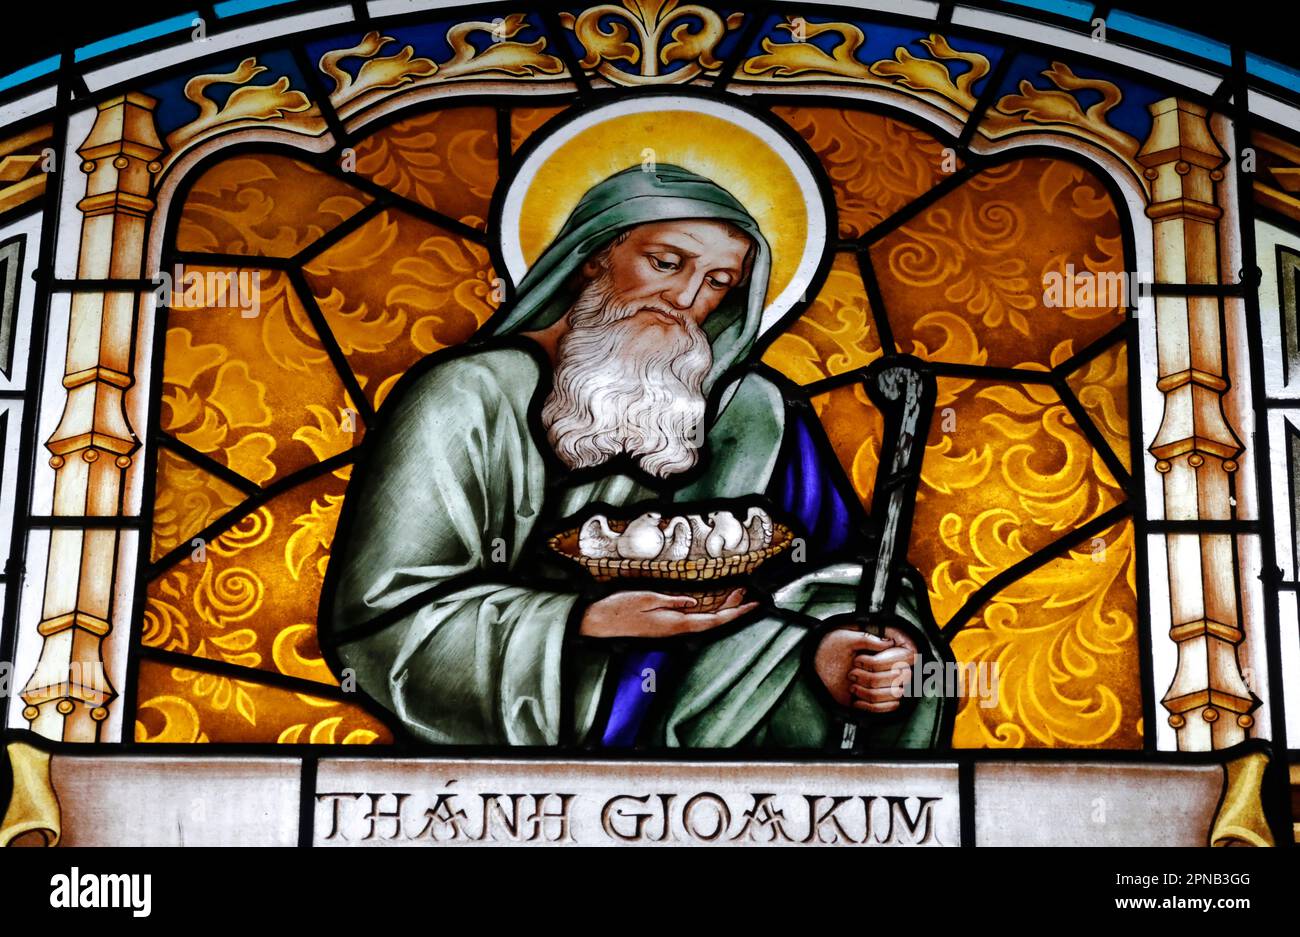 Thi Nghe Church. Stained glass.  Saint Joachim was the husband of Saint Anne and the father of Mary. Ho Chi Minh City. Vietnam. Stock Photo